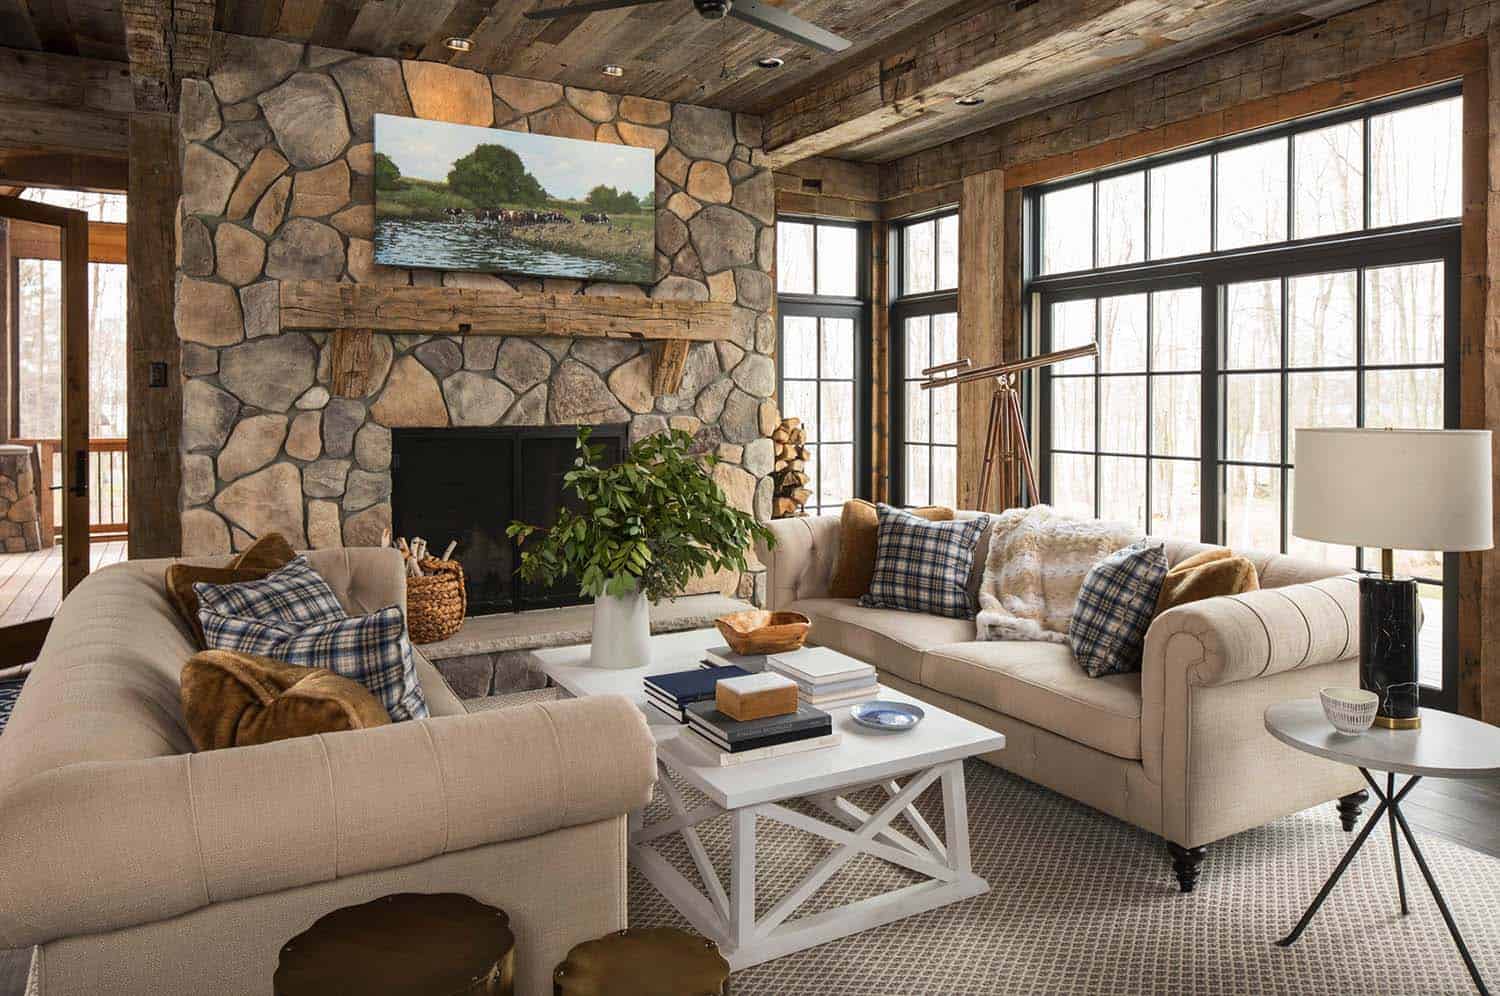 Rustic lakeside retreat in Wisconsin features inviting design details